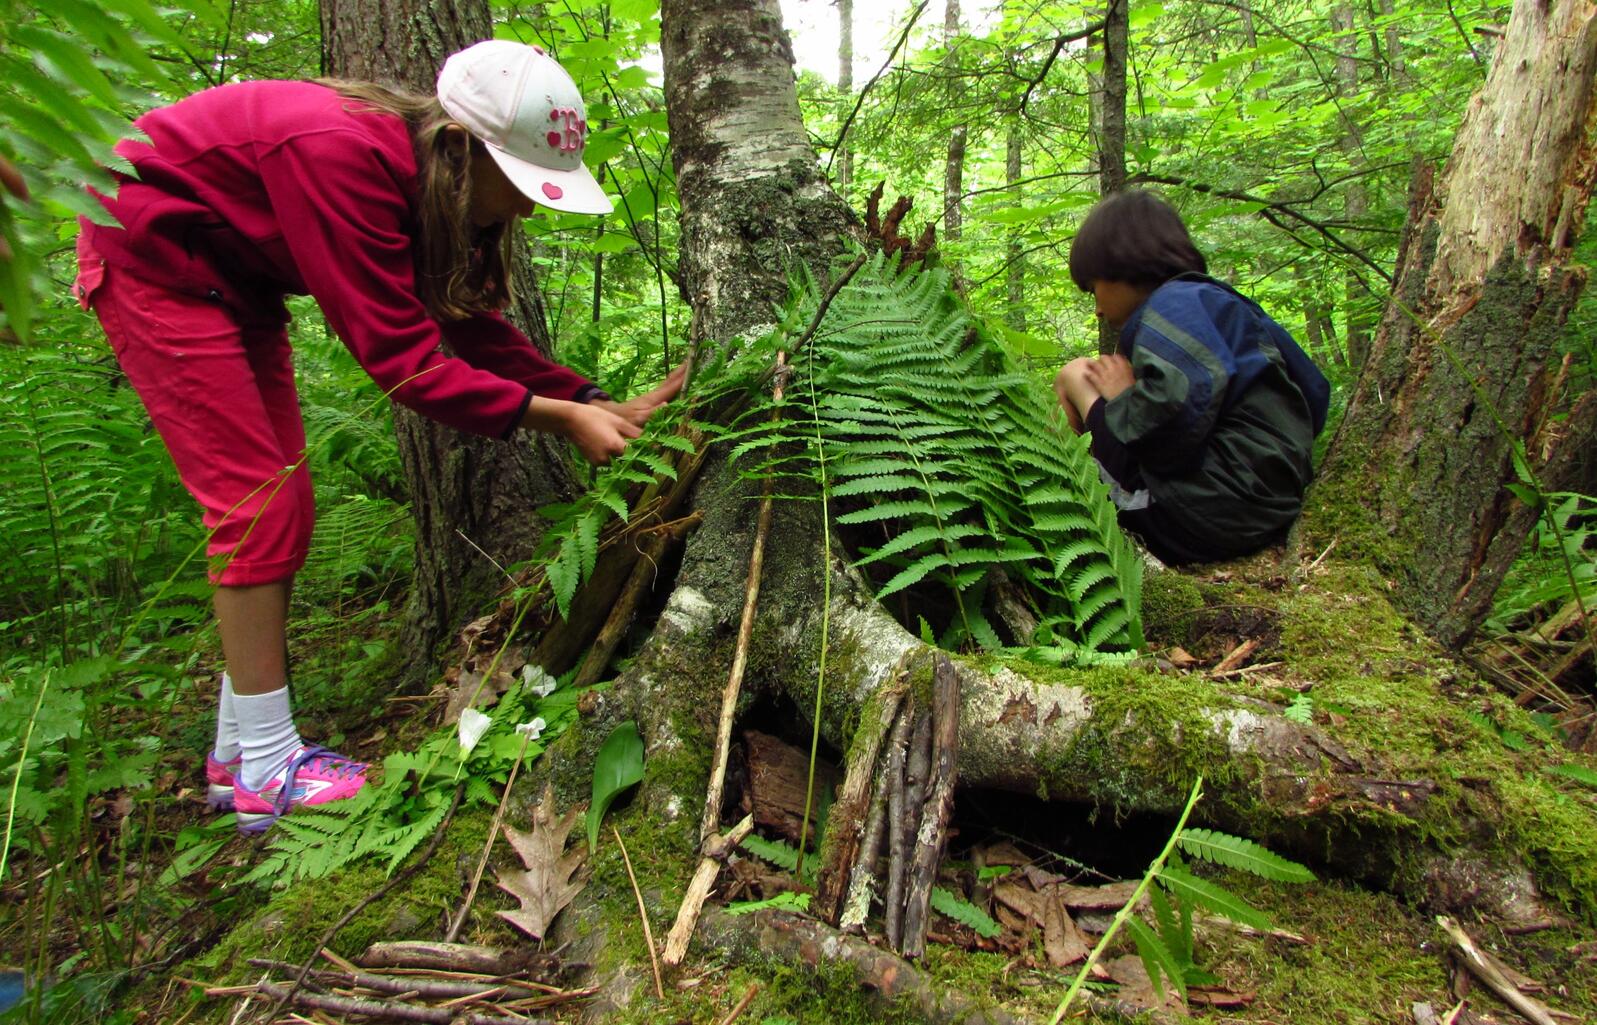 Two children build a fairy house at the base of a tree with sticks and ferns.